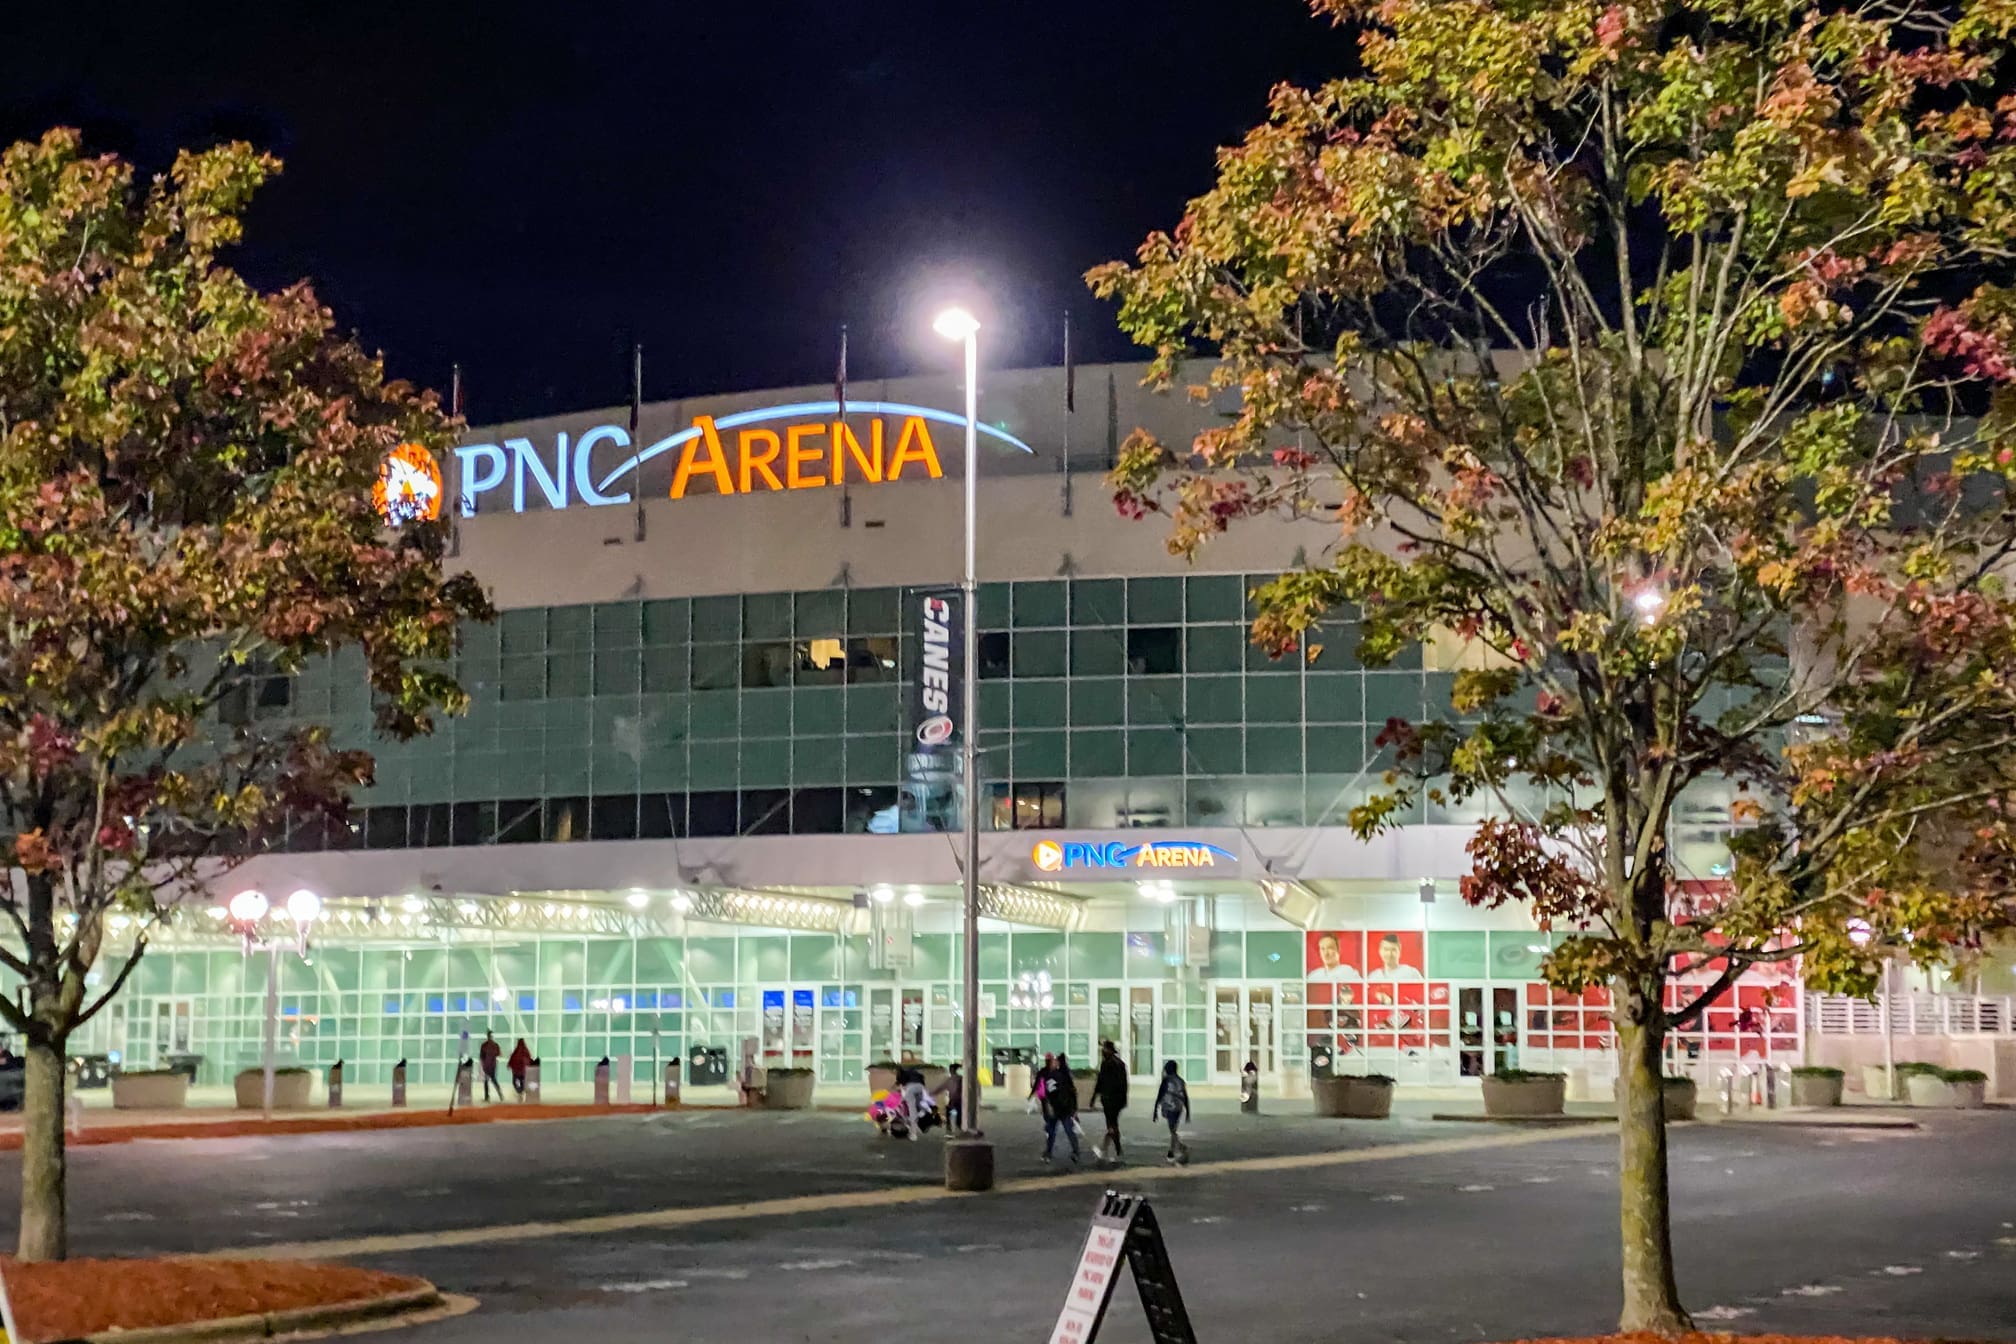 pnc arena